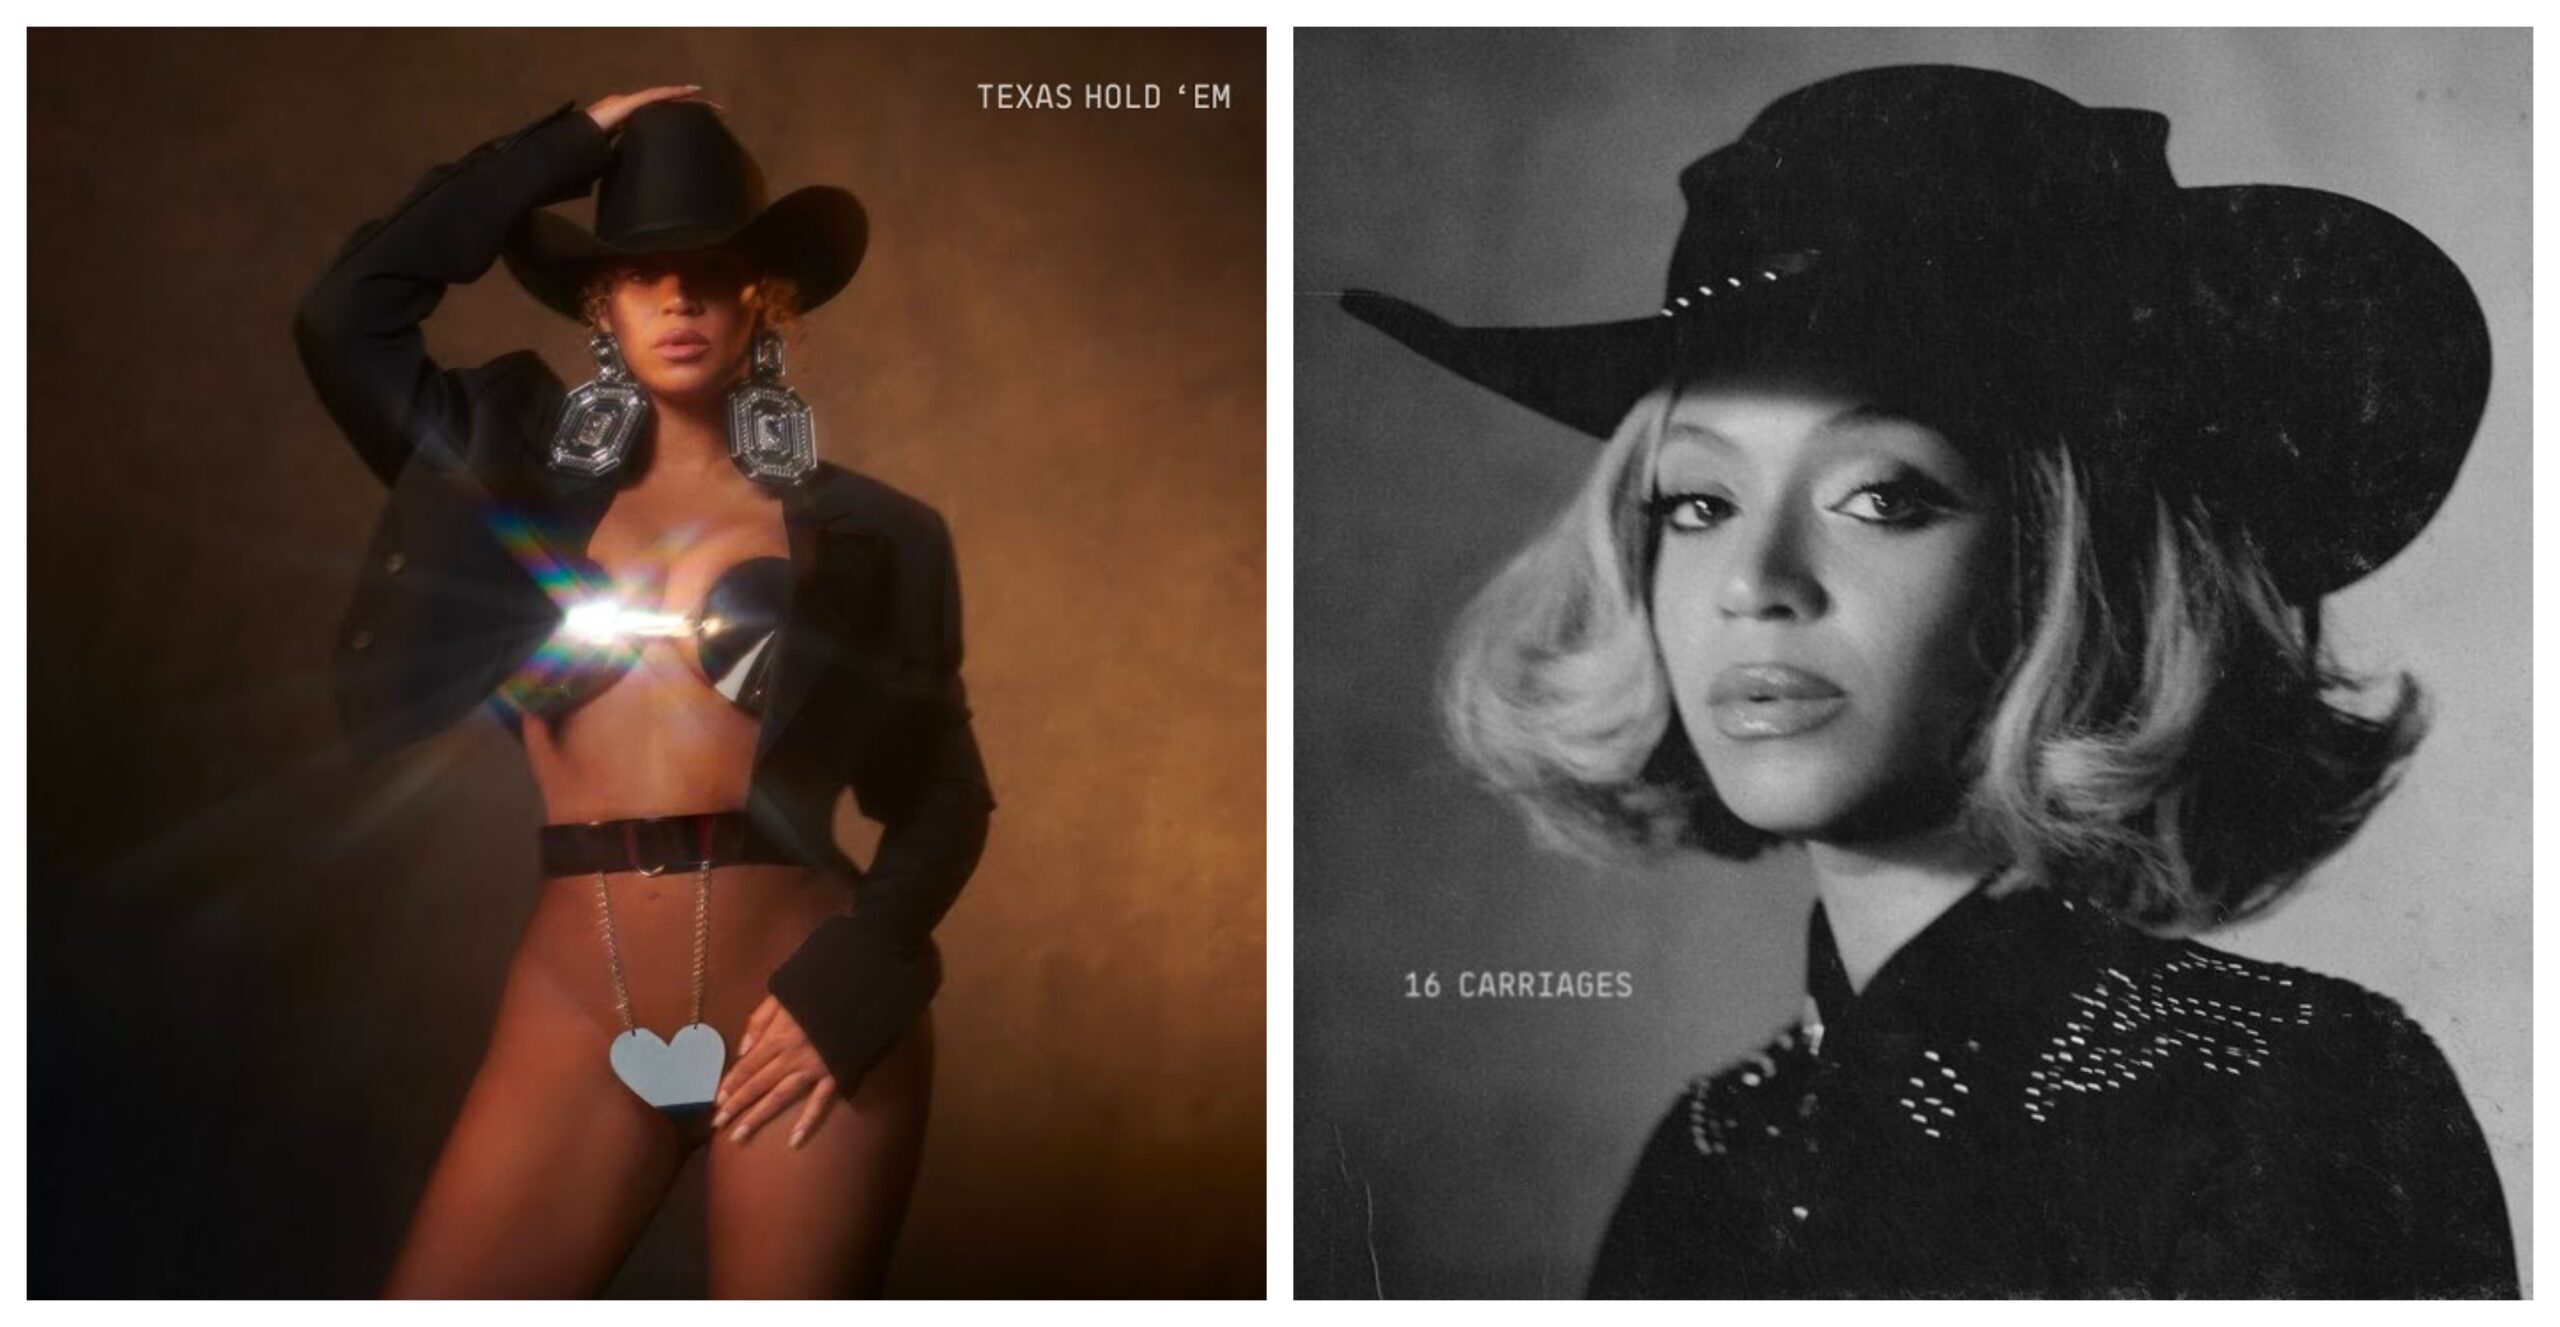 Breaking: Beyonce Debuts TWO New Songs ‘Texas Hold ‘Em’ & ’16 Carriages’ [Listen]